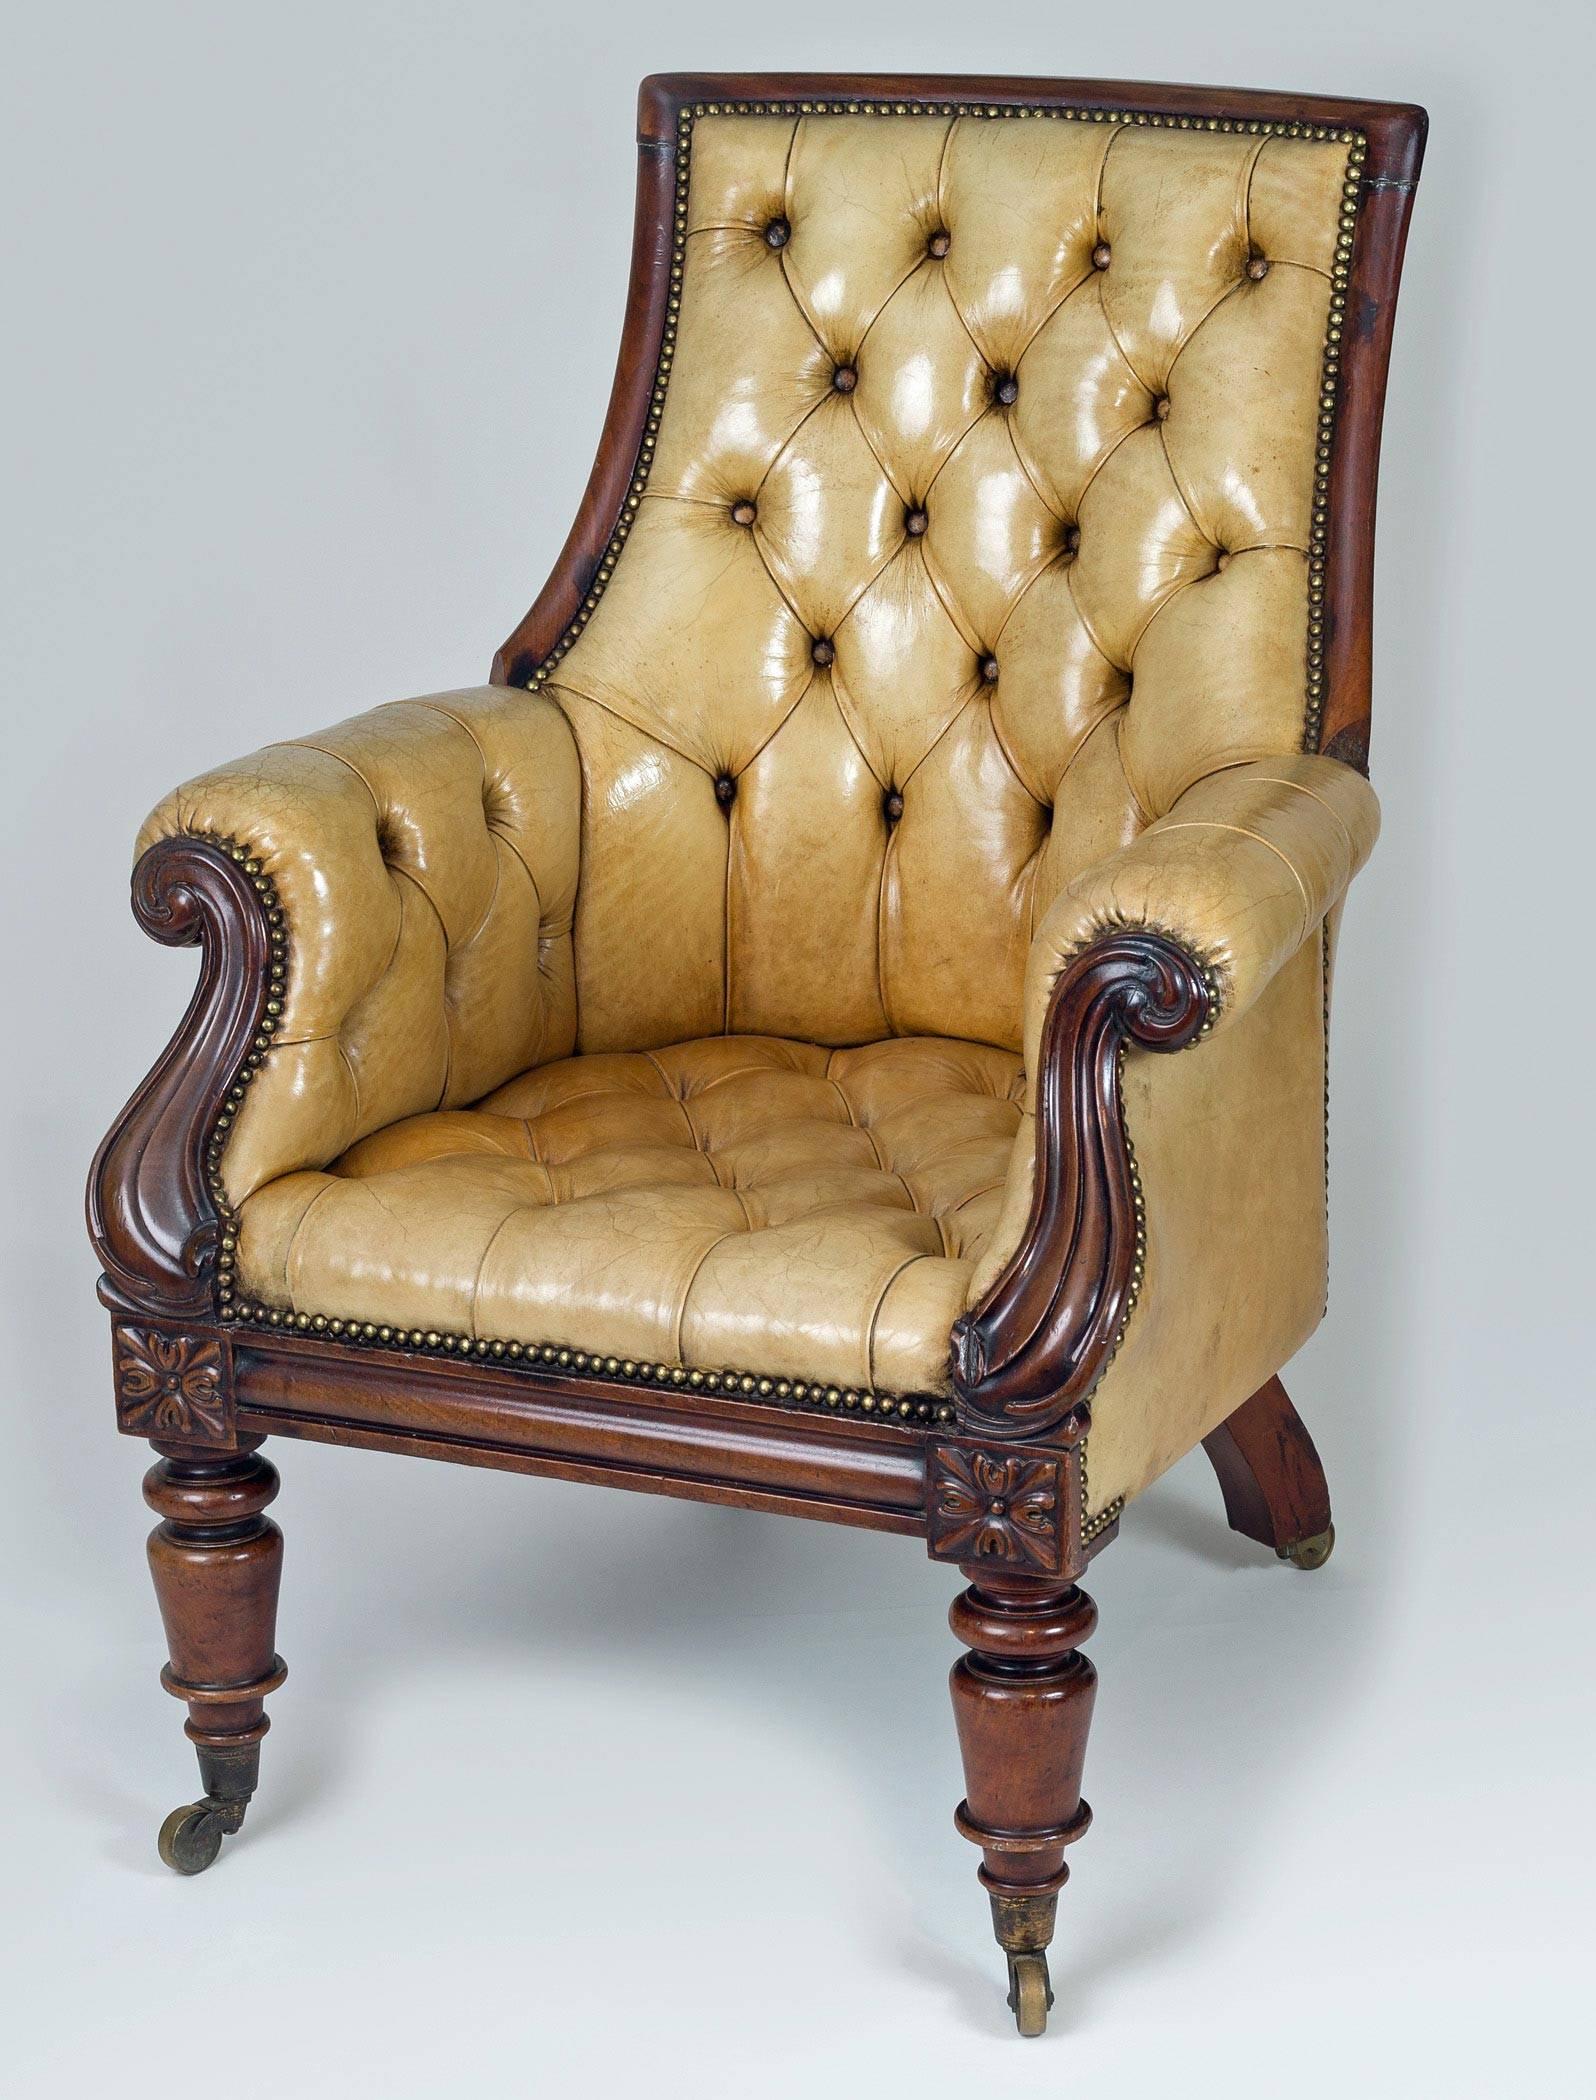 Important late Regency mahogany framed and leather library armchair with high back, outward scrolled arms, down swept carved arm supports above a deep mahogany frieze with carved acanthus leaf blocks, raised on ring turned legs on brass casters. The